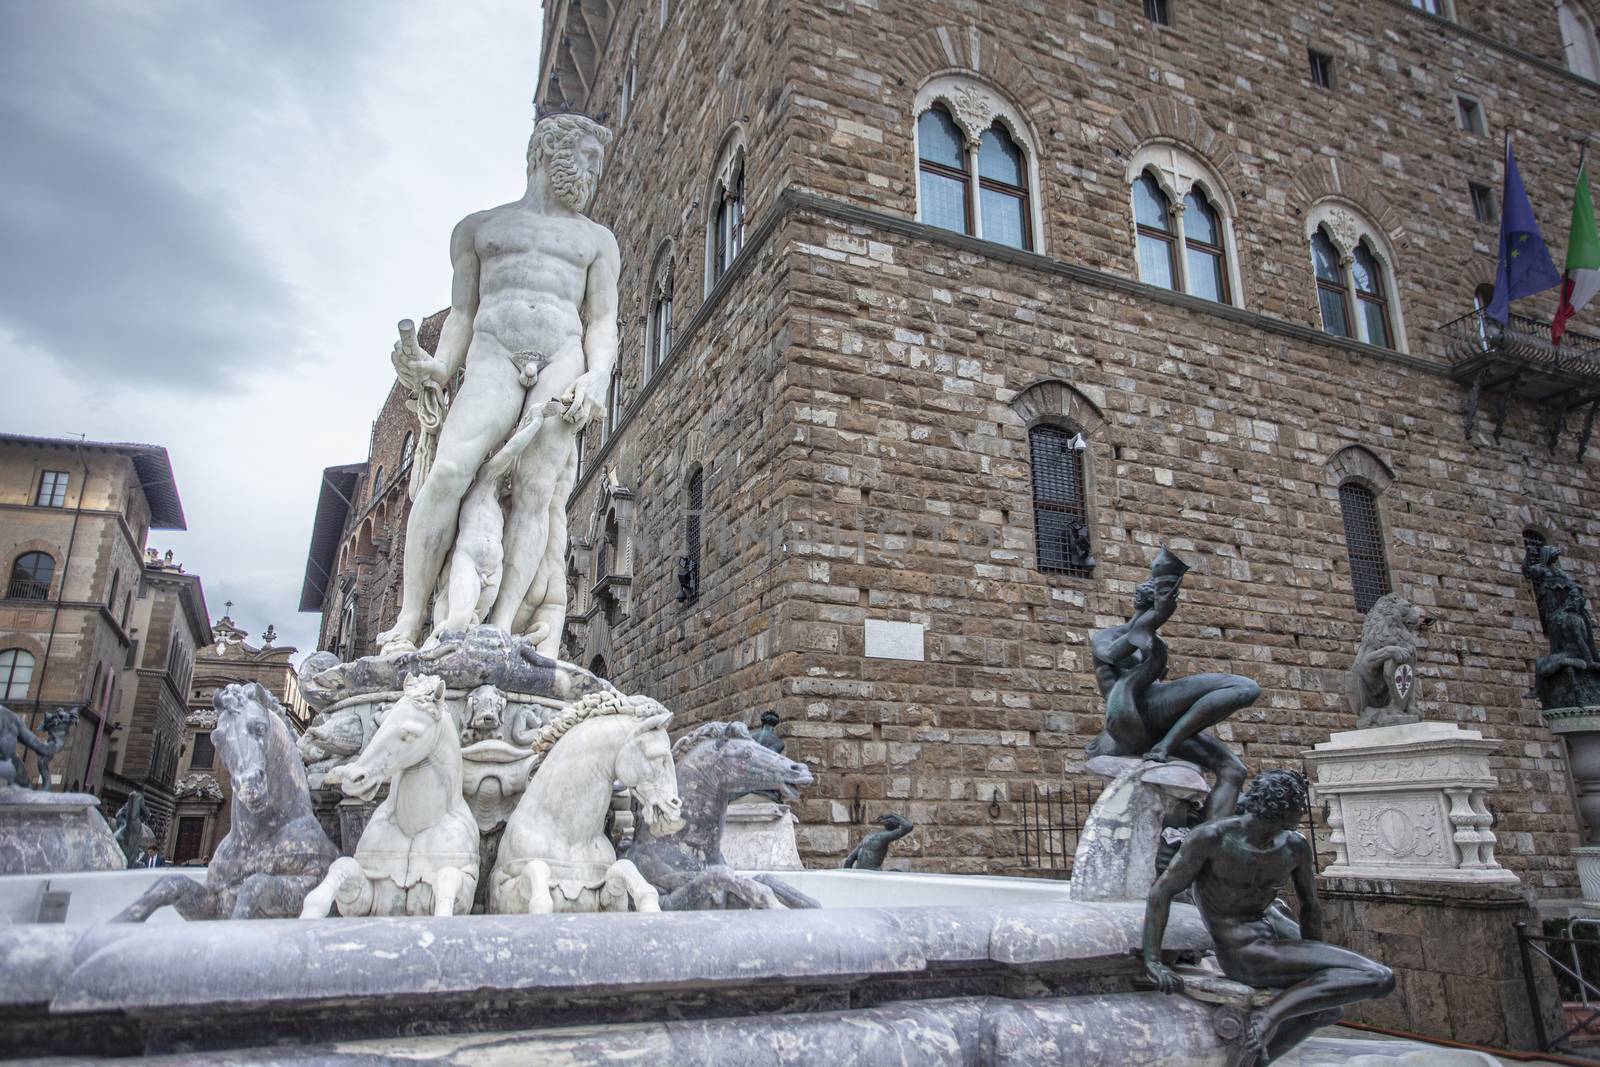 Michelangelo's David Statue in Florence, Italy